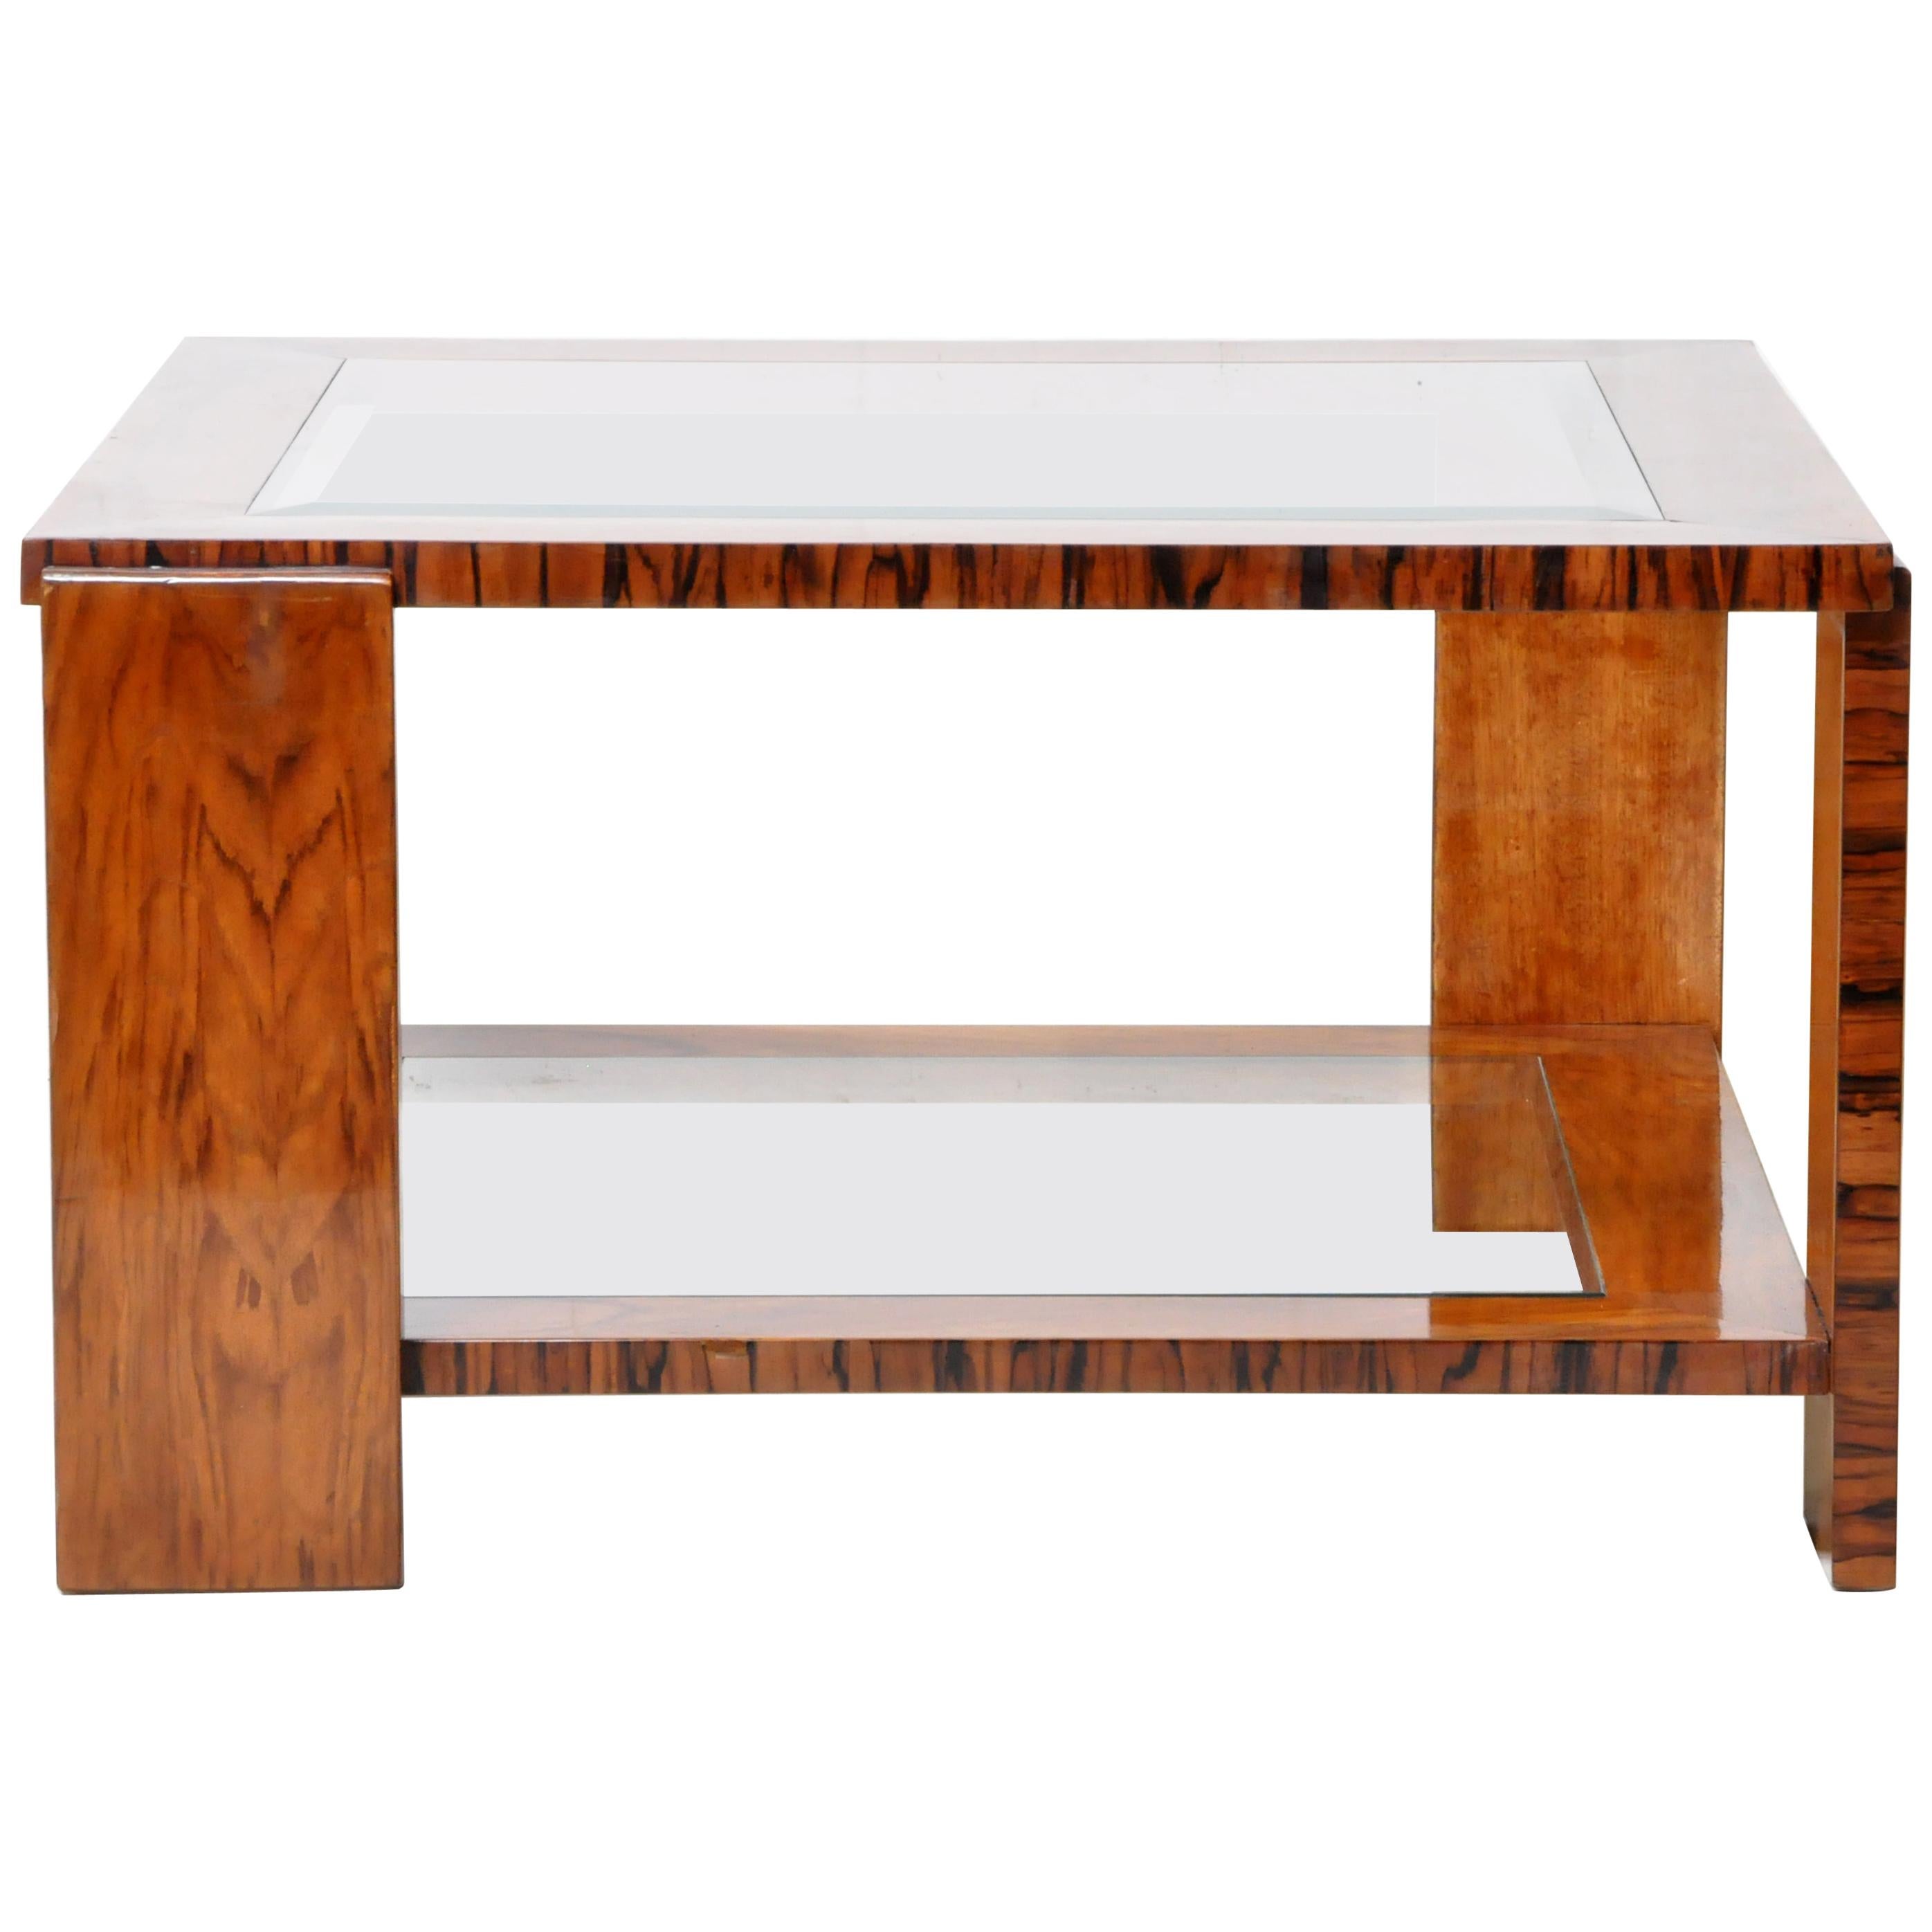 Hungarian Art Deco Coffee Table For Sale